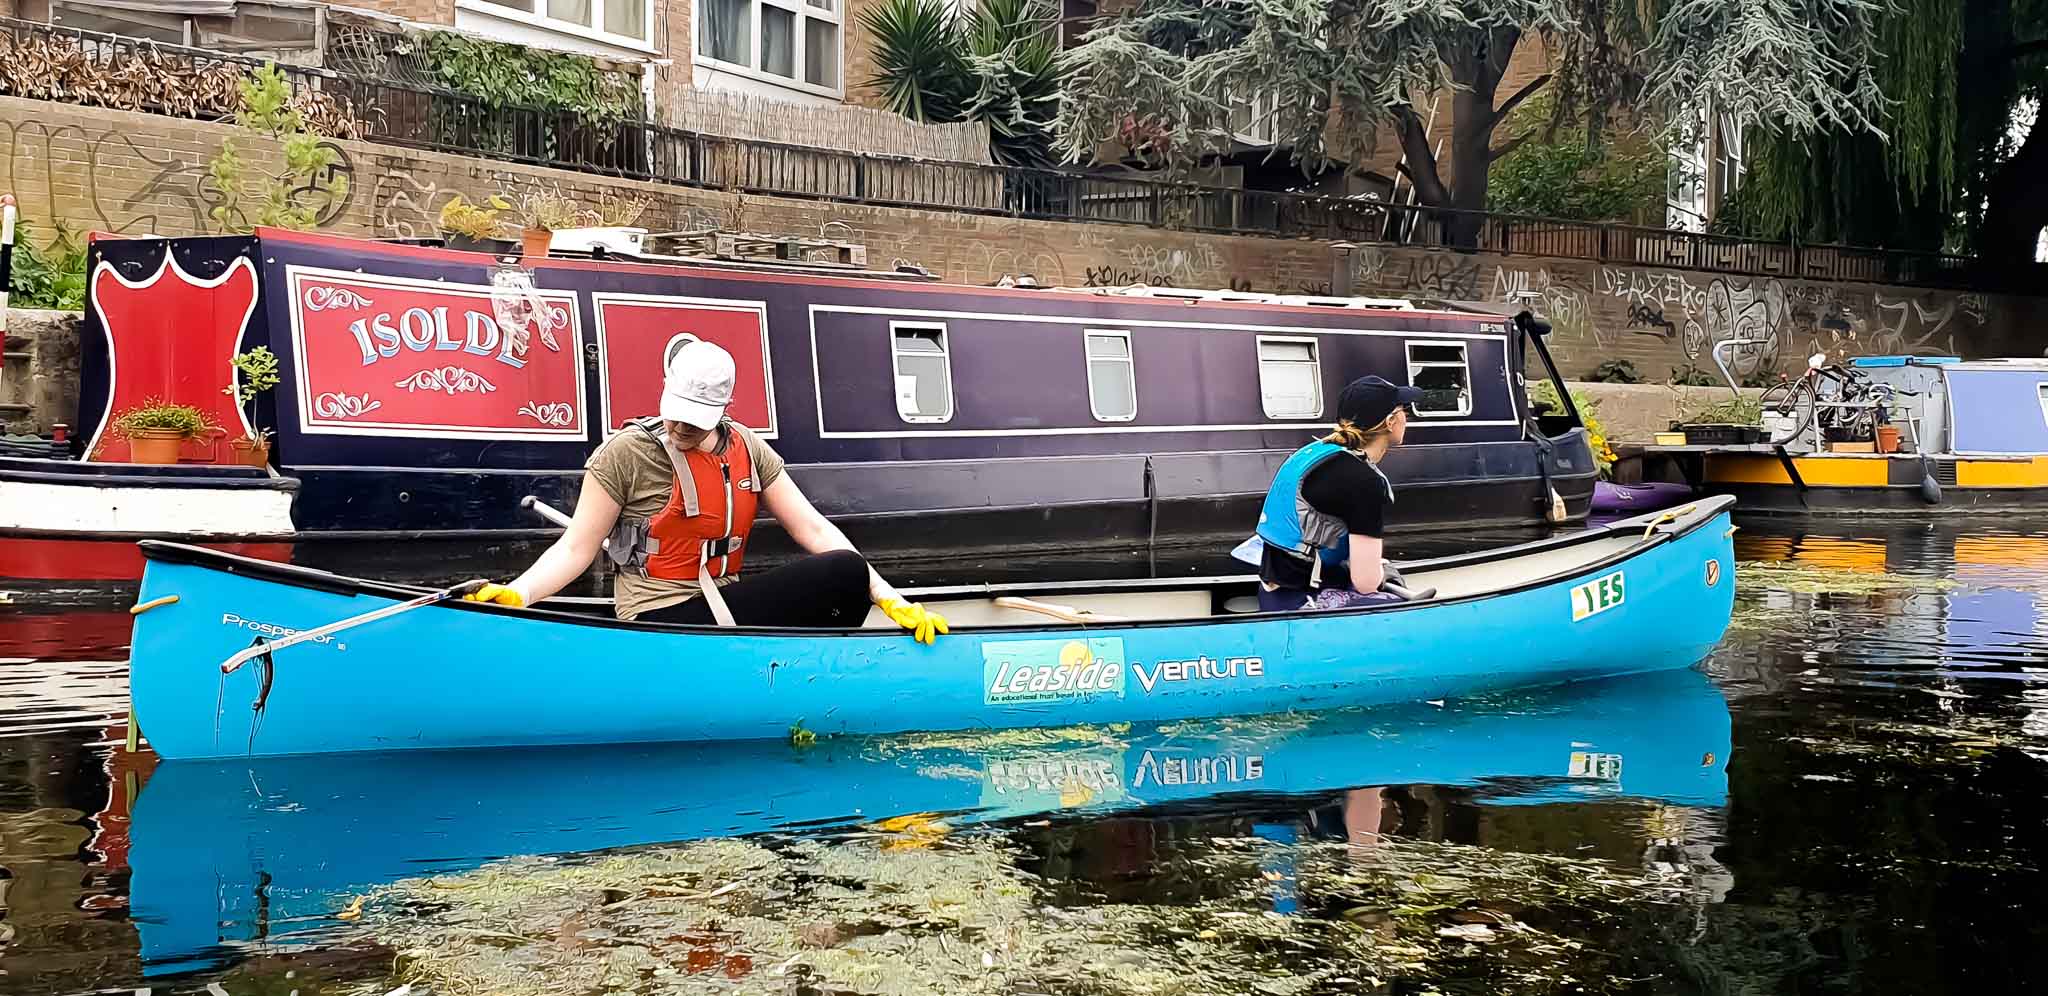 Forsters’ Green Impact Group support charity Thames21 in River Lea clean-up